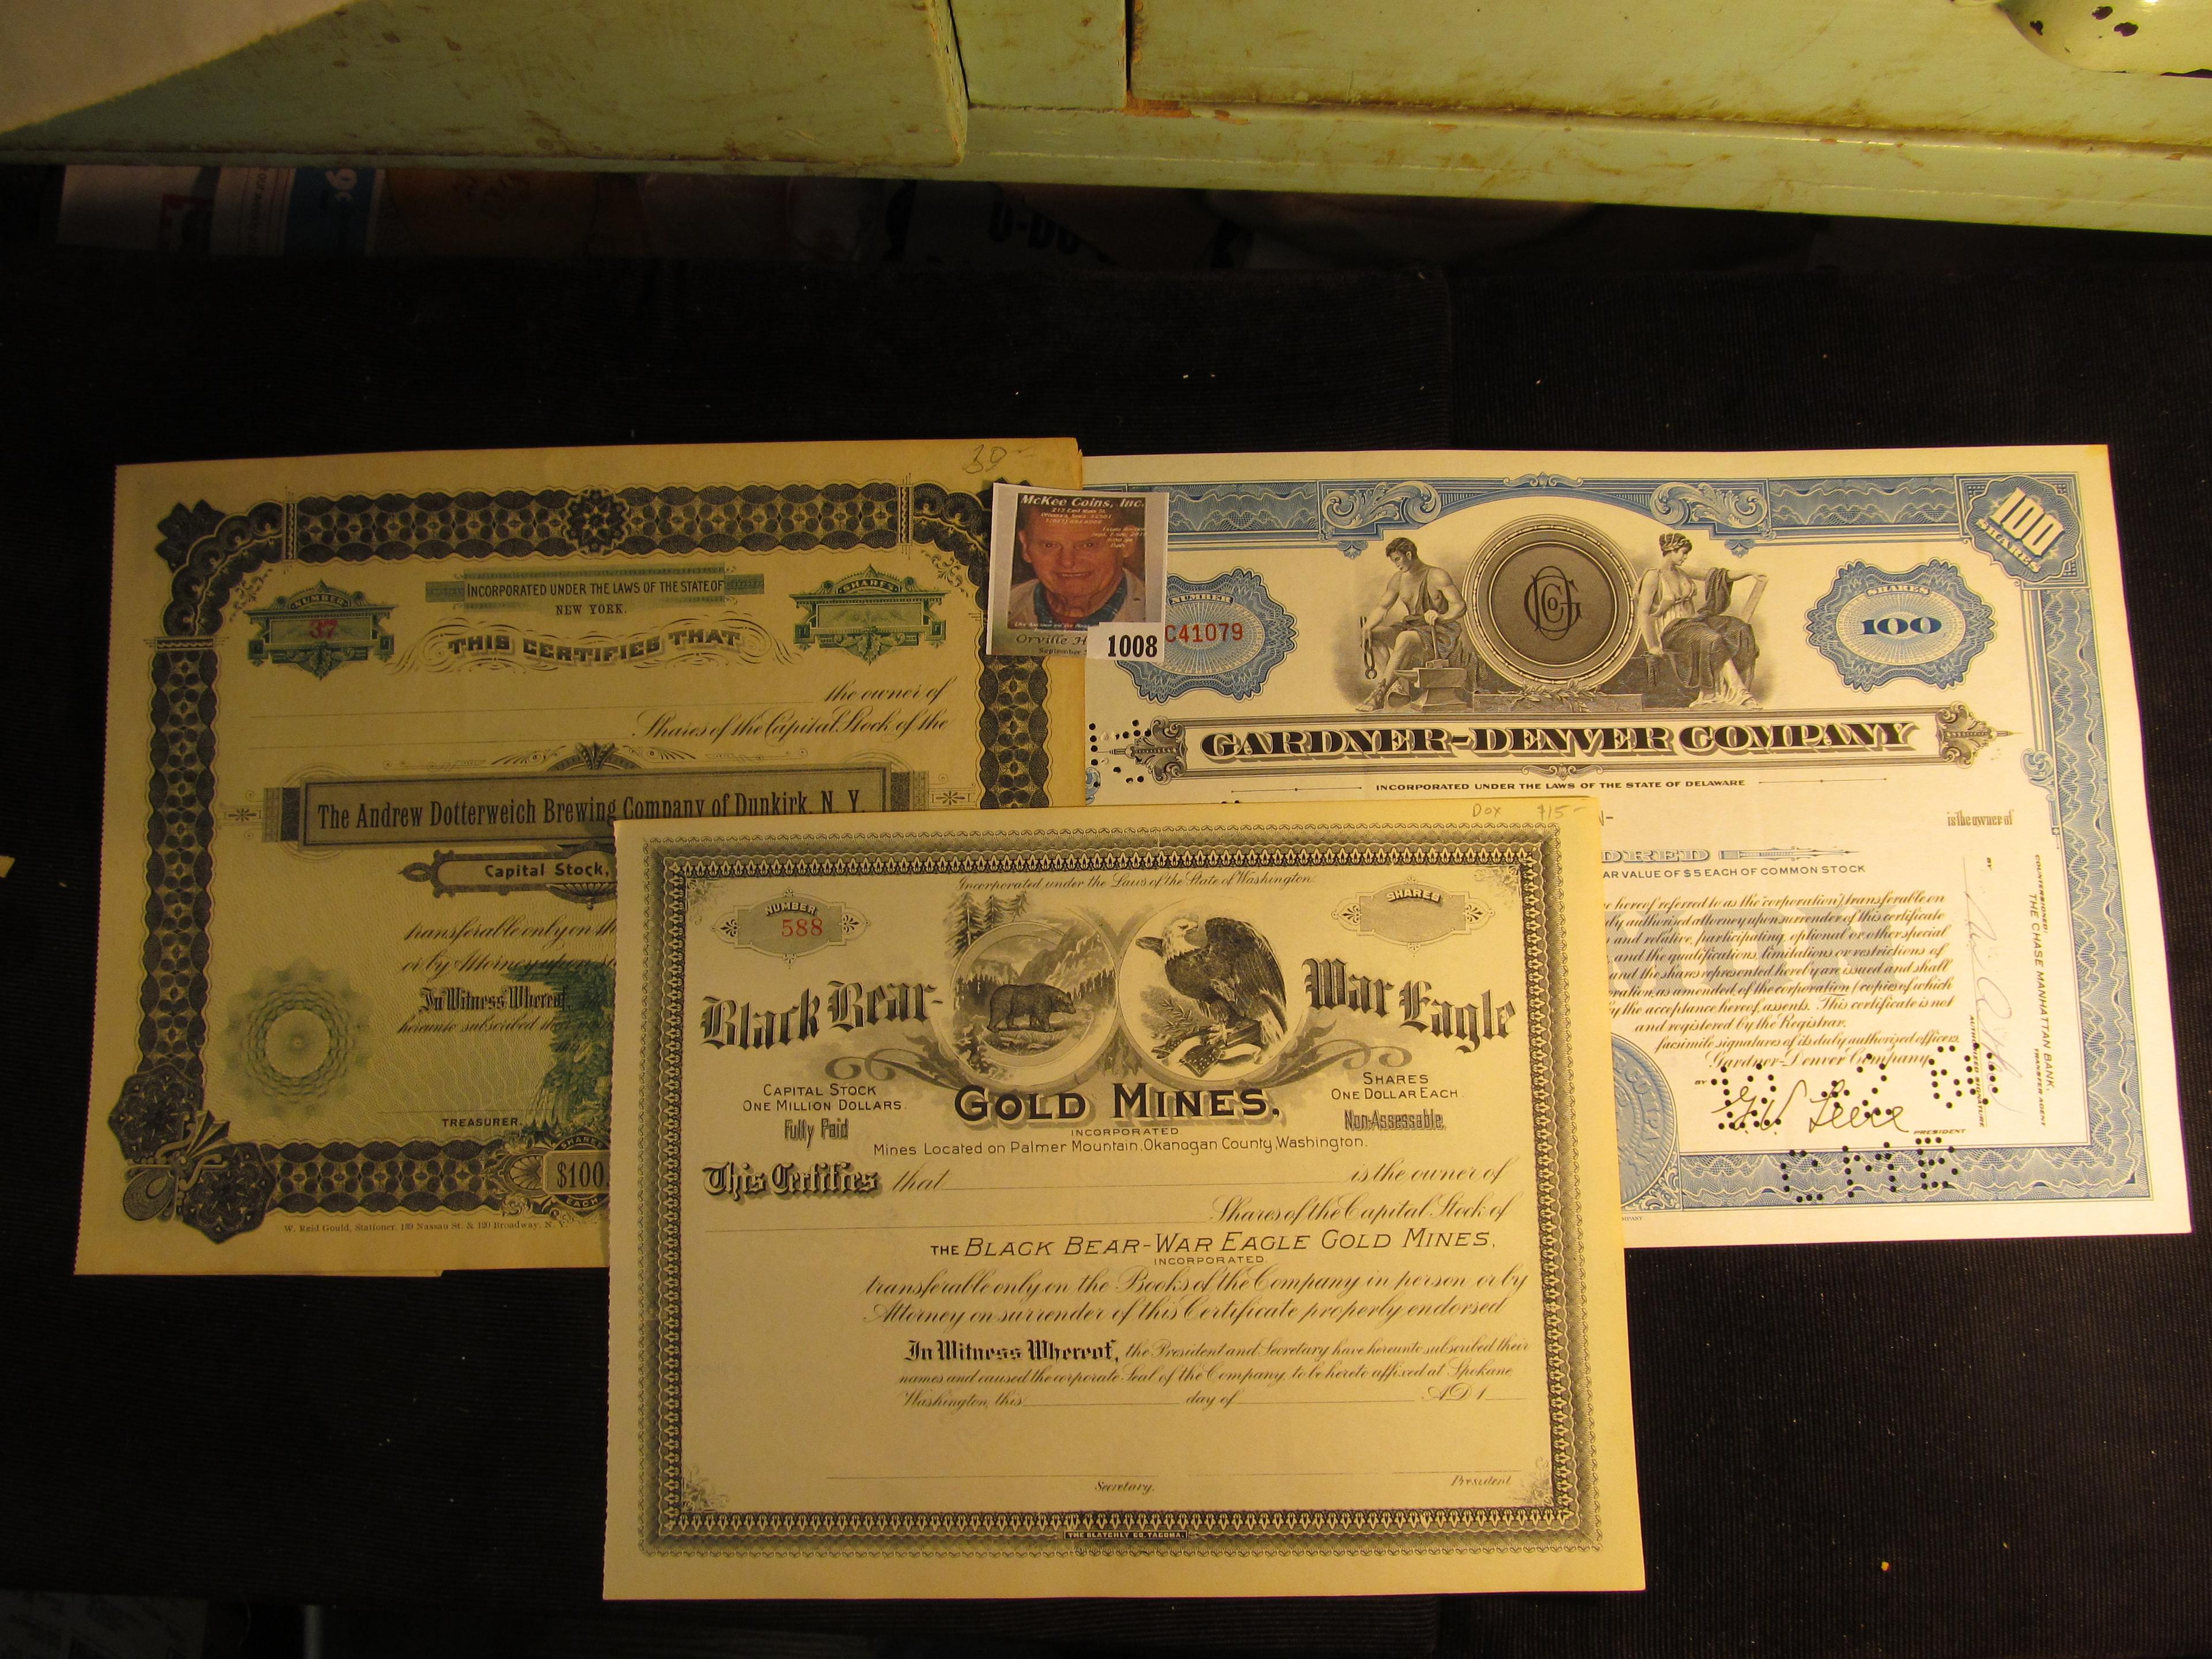 Number 588 Stock Certificate "Black Bear War Eagle Gold Mines, Mines located on Palmer Mountain, Oka